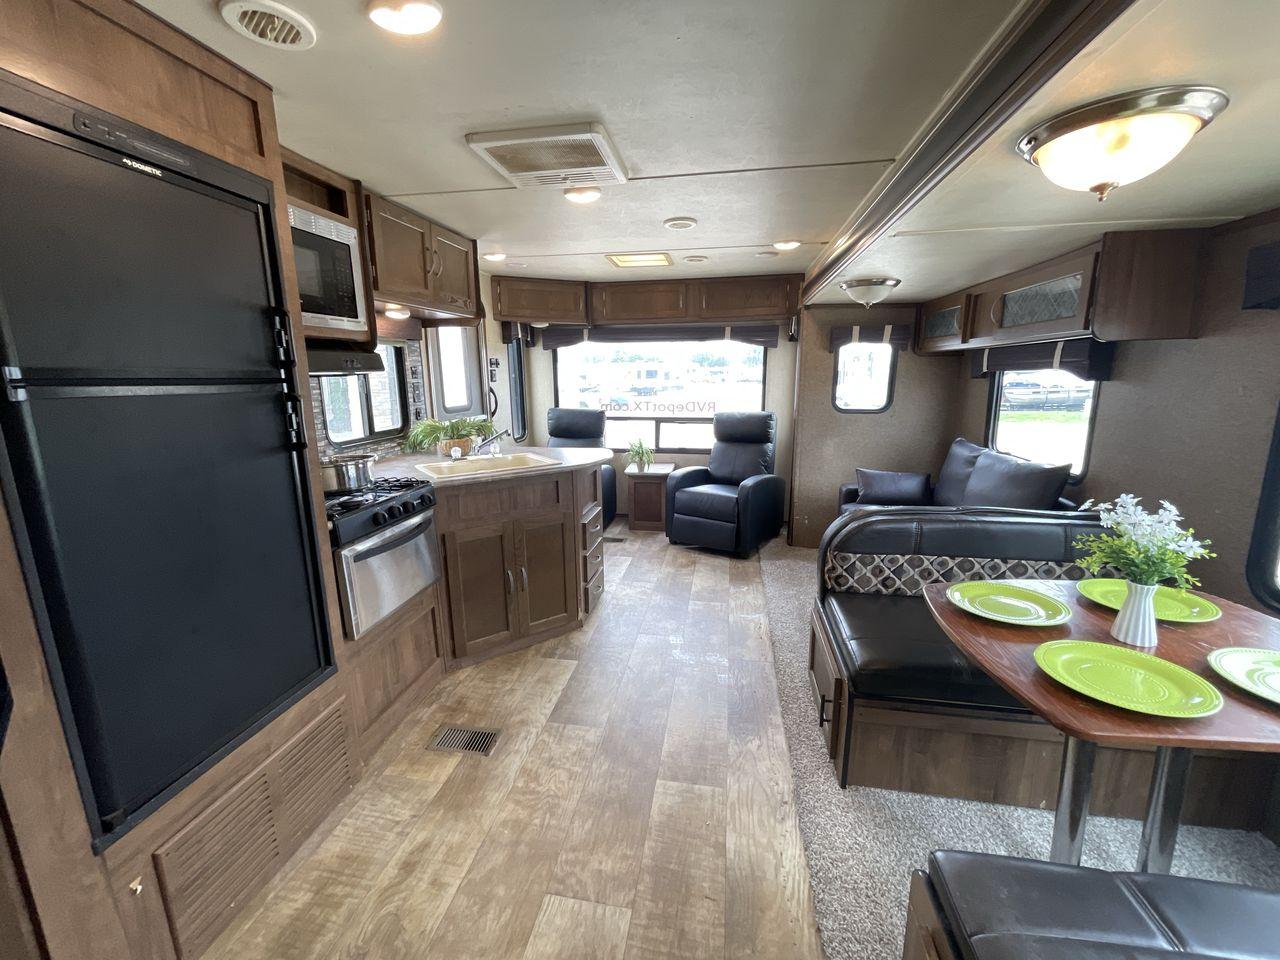 2018 GULFSTREAM TRAILMASTER 262RLS (1NL1GTP2XJ1) , Length: 31.25 ft. | Dry Weight: 6,849 lbs. | Slides: 1 transmission, located at 4319 N Main Street, Cleburne, TX, 76033, (817) 221-0660, 32.435829, -97.384178 - This 2018 Gulf Stream Trailmaster 262RLS travel trailer measures just over 31' in length. It is a dual axle, steel wheel setup with a dry weight of 6,849 lbs and a carrying capacity of 1,421 lbs. With a dry weight of 6,849 lbs., the Trailmaster 262RLS offers easy maneuverability without compromising - Photo #11